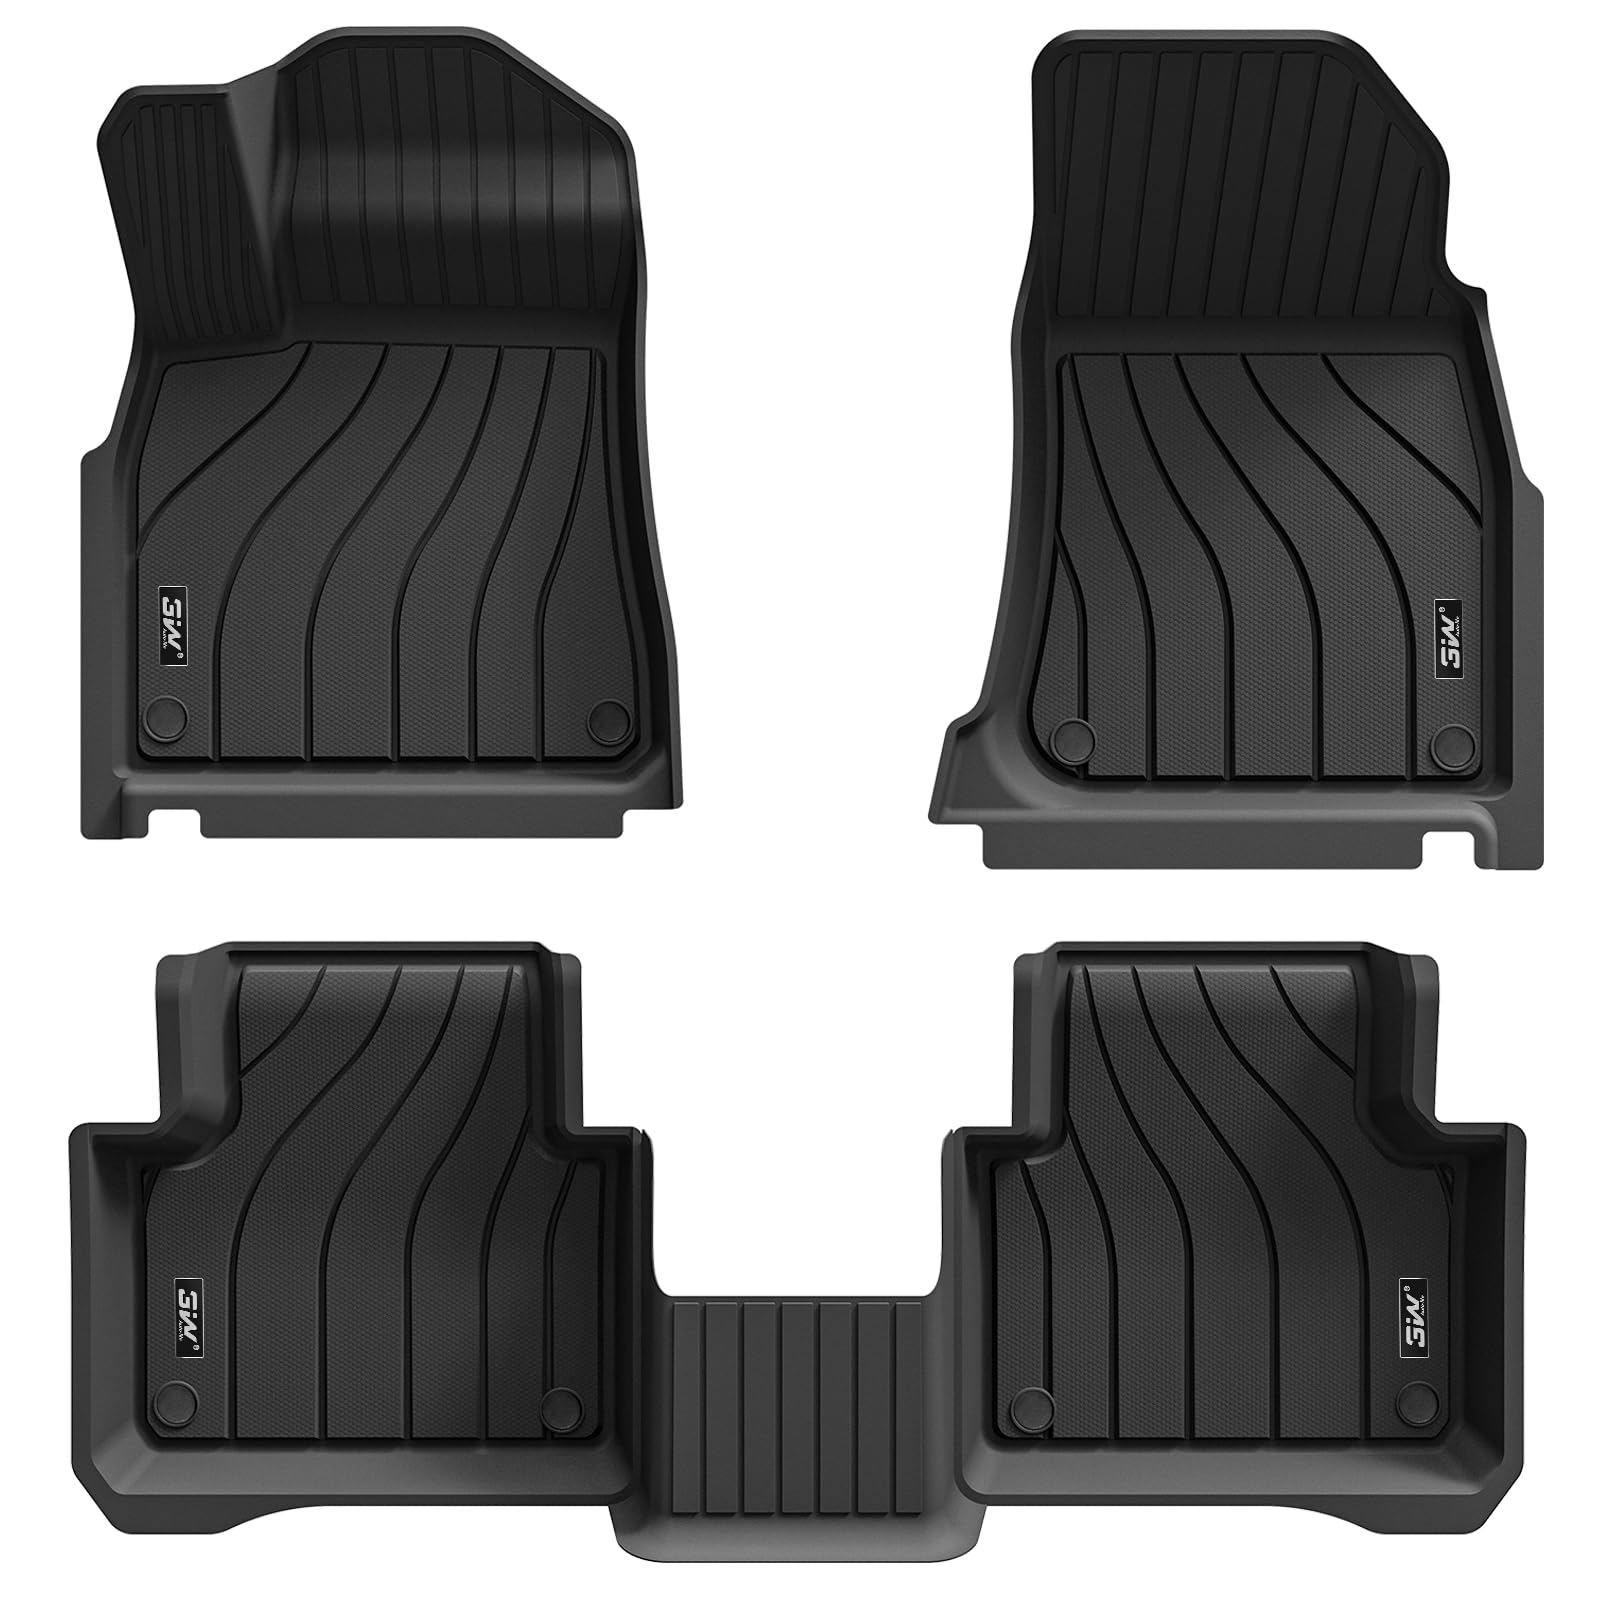 3W Porsche Cayenne 2019-2023 Custom Floor Mats TPE Material & All-Weather Protection Vehicles & Parts 3Wliners 2019-2023 Cayenne 2019-2023 1st&2nd Row Mats